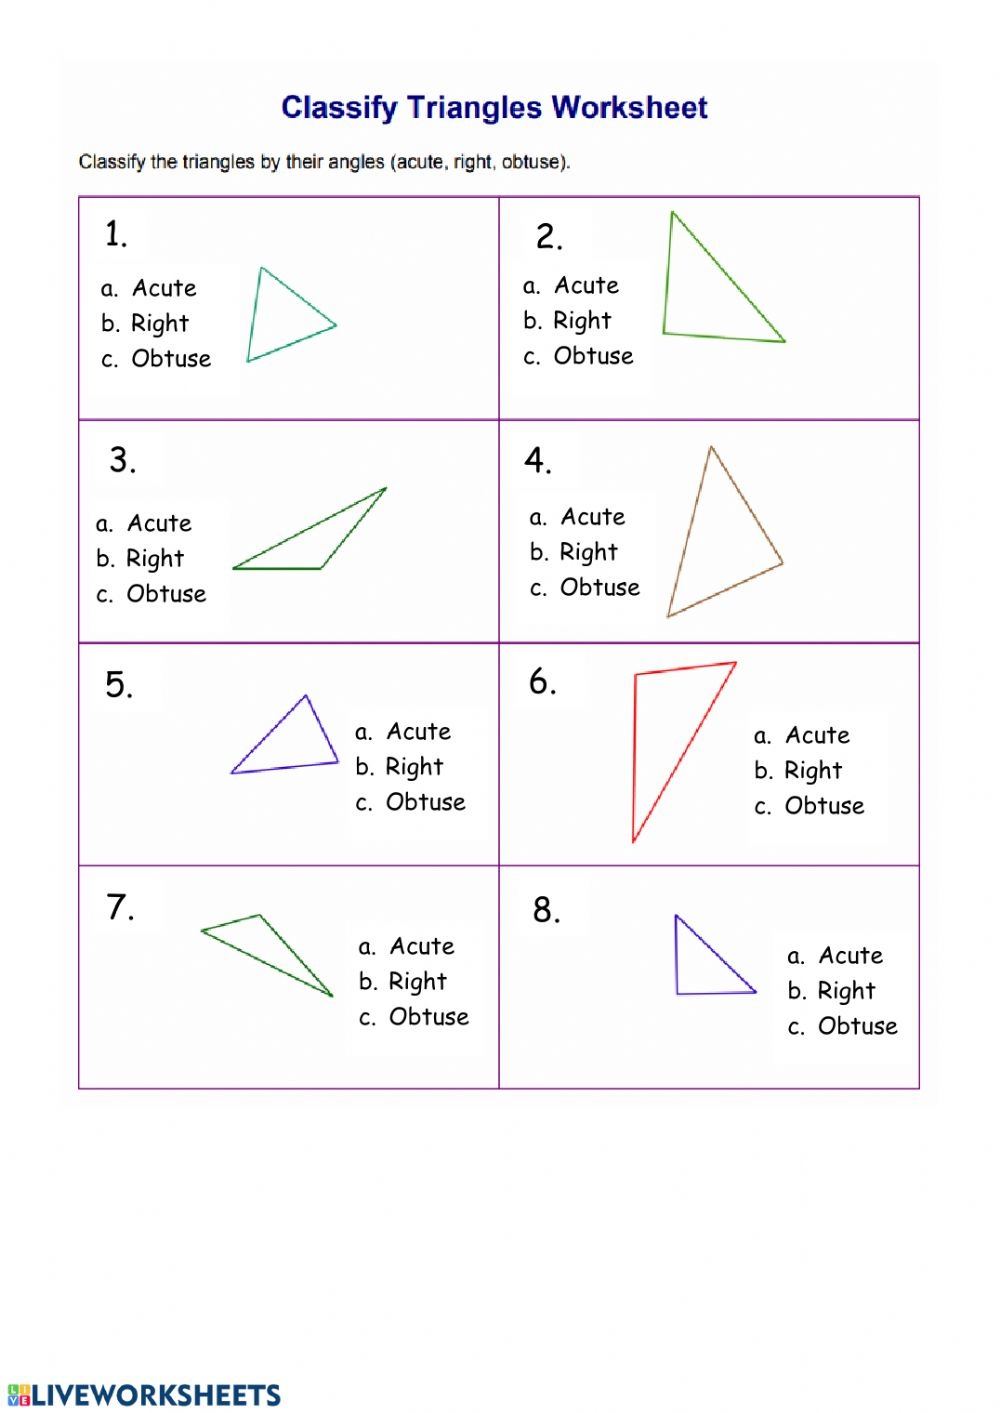 Classify Triangles Worksheet 8635